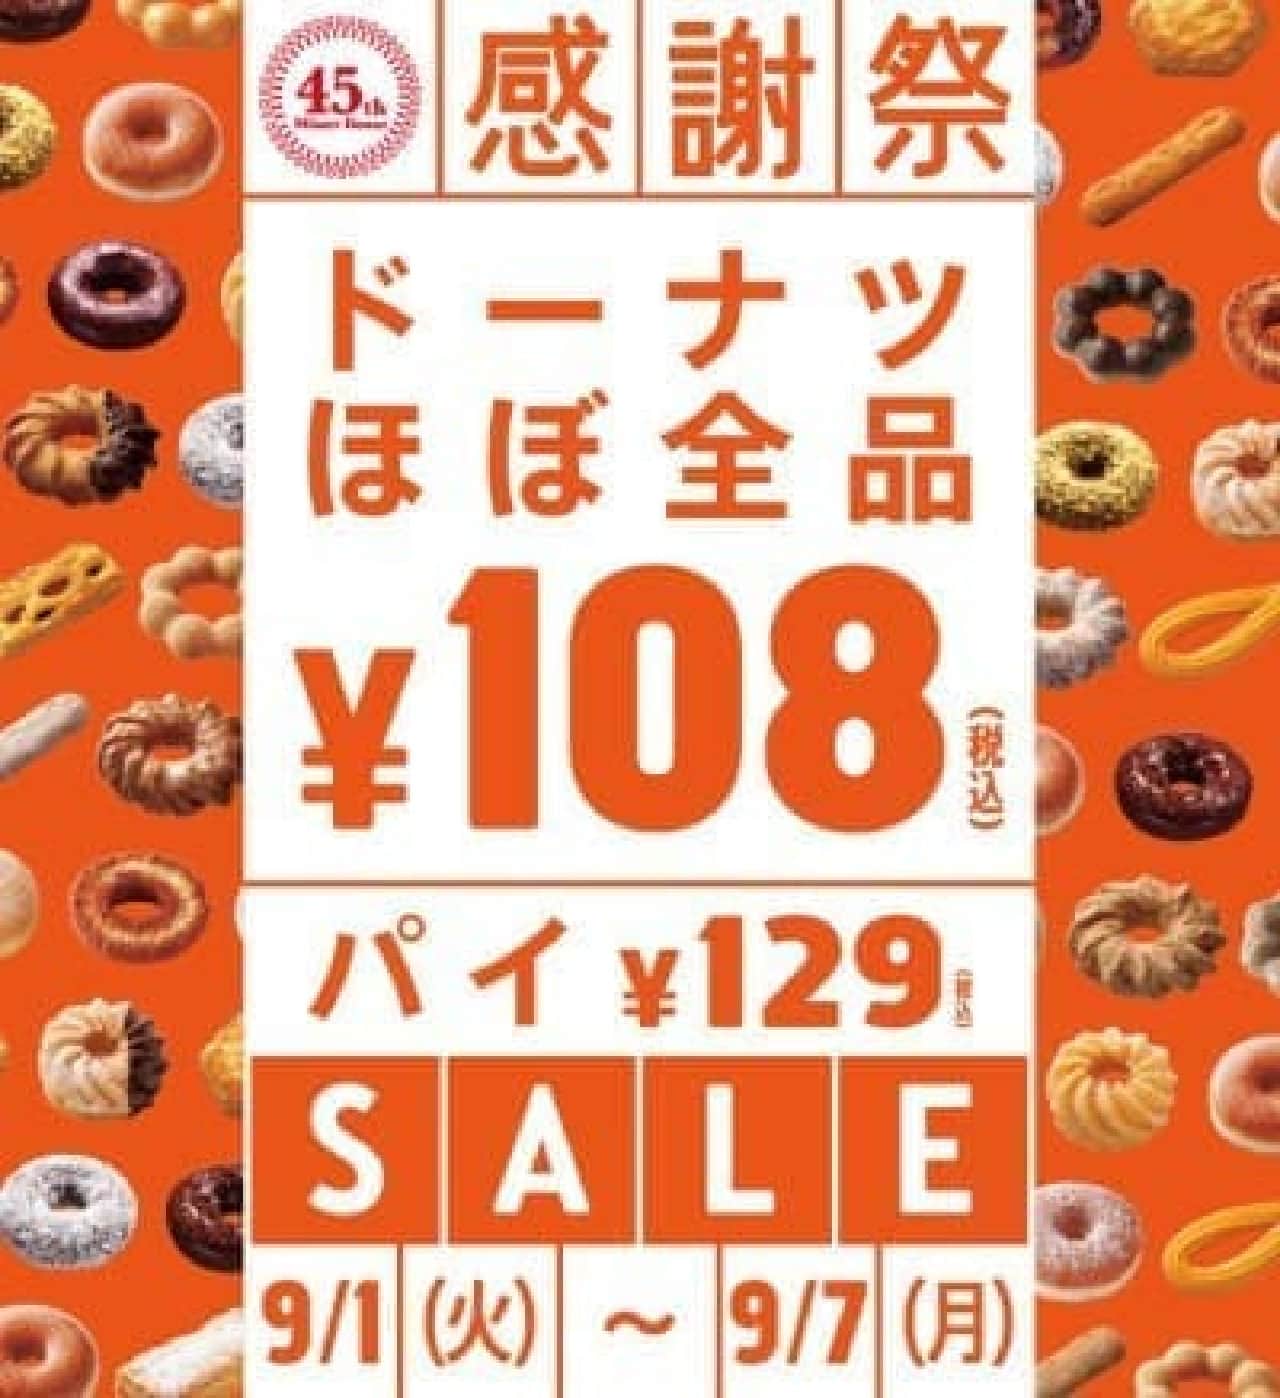 Please do everything from right to left! (Source: Mister Donut official website)